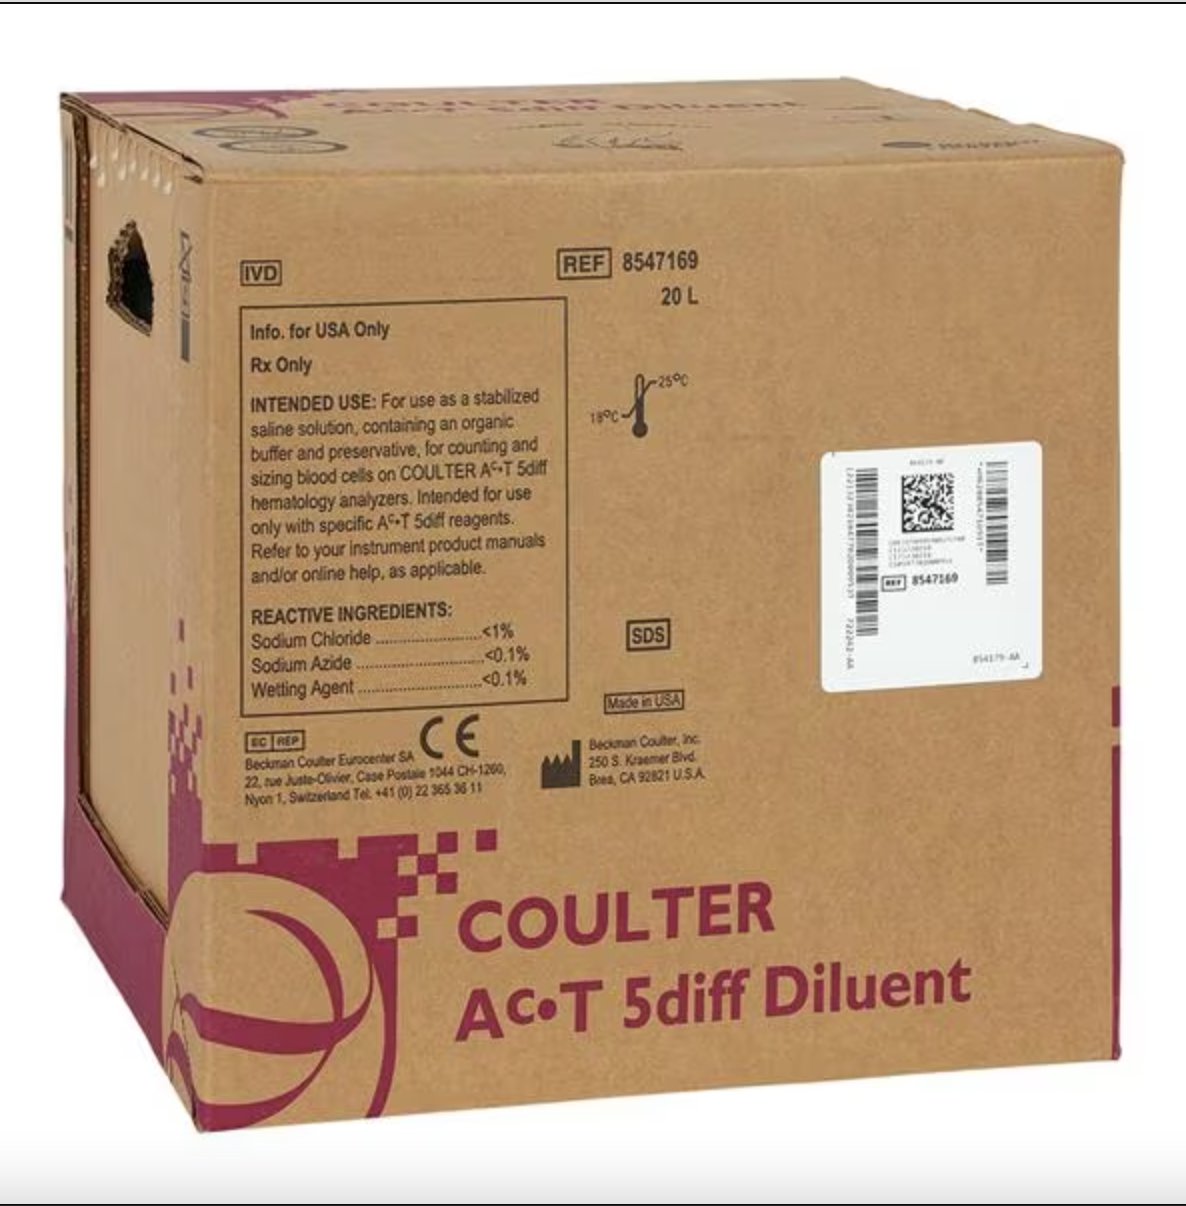 Reagent Diluent Coulter Ac.T 5diff For Coulter Ac.T 5 diff Hematology Analyzer 20 Liter | 8547169